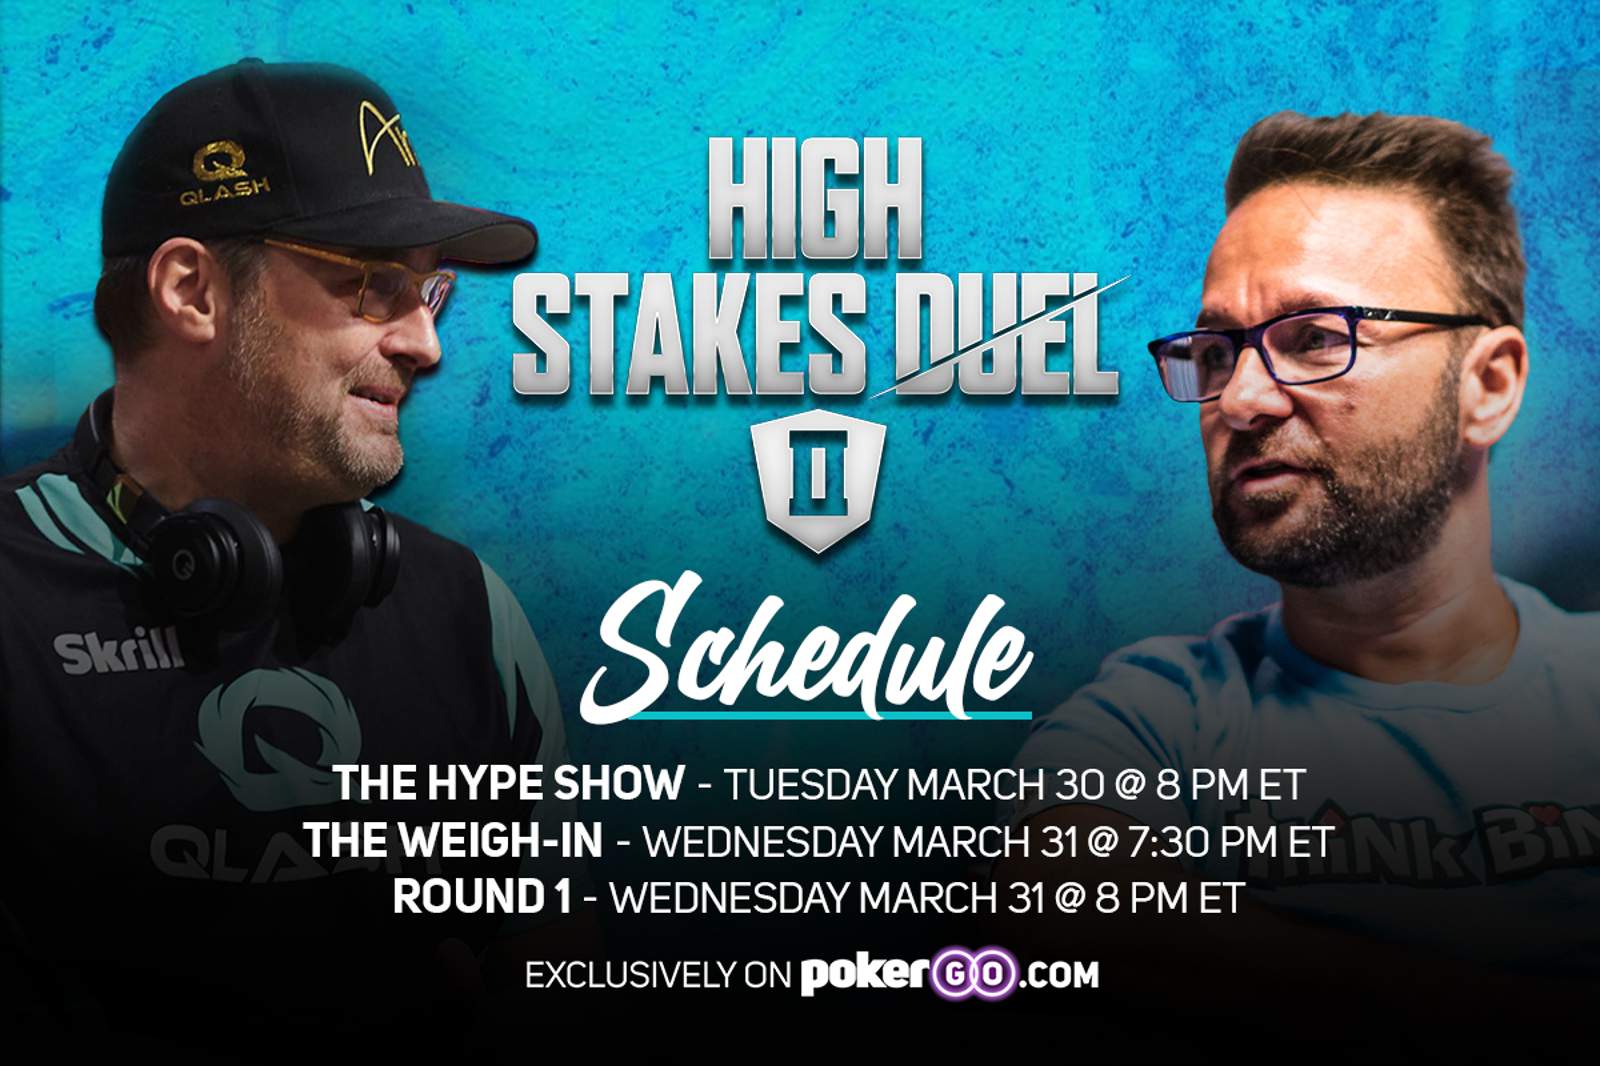 Round 1 of High Stakes Duel II Schedule - 3 Different Shows Over 2 Nights